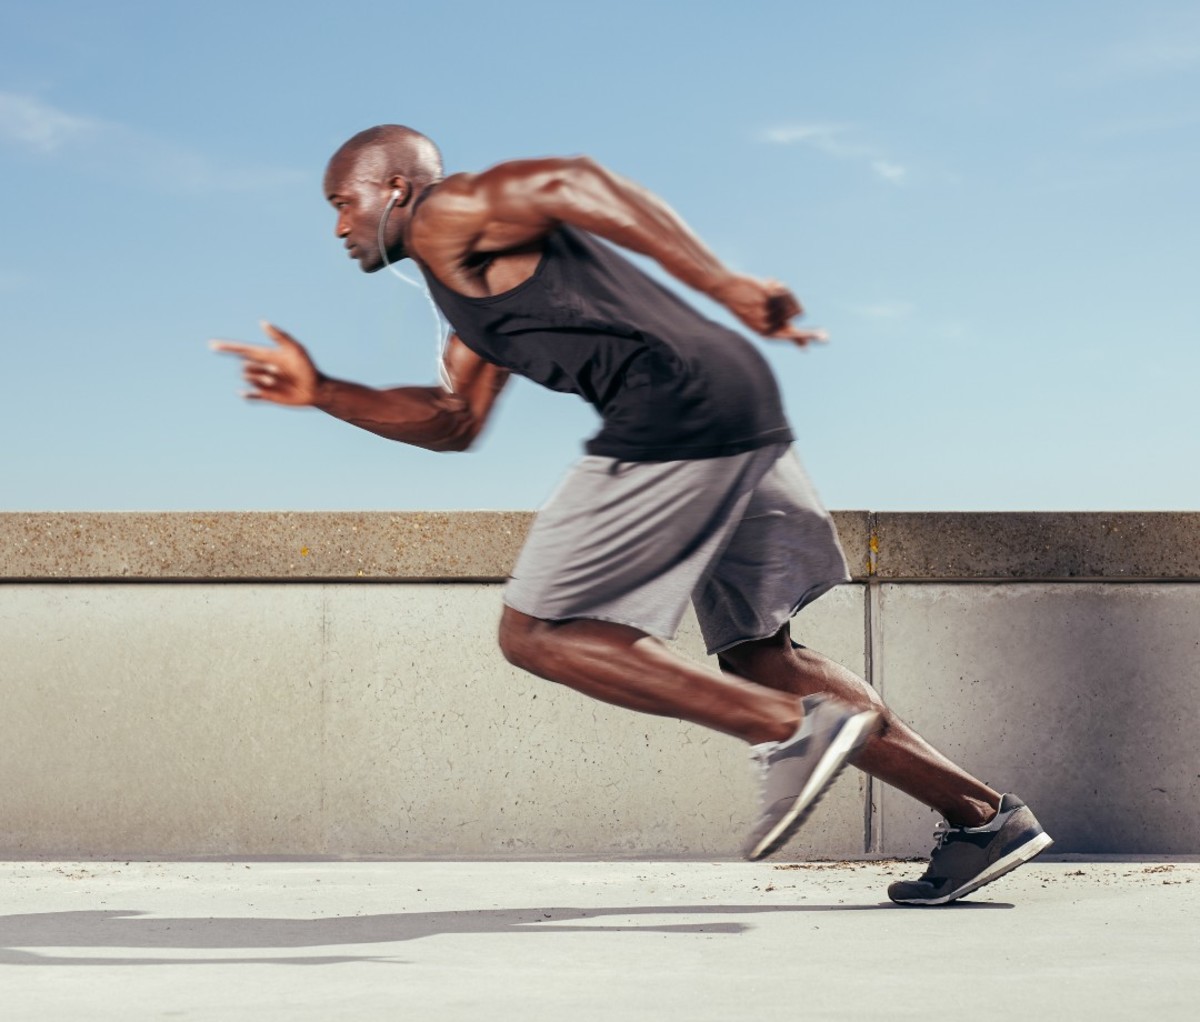 LONG INTERVALS: SPEED WORKOUT FOR THE DISTANCE RUNNER — Lea Genders Fitness